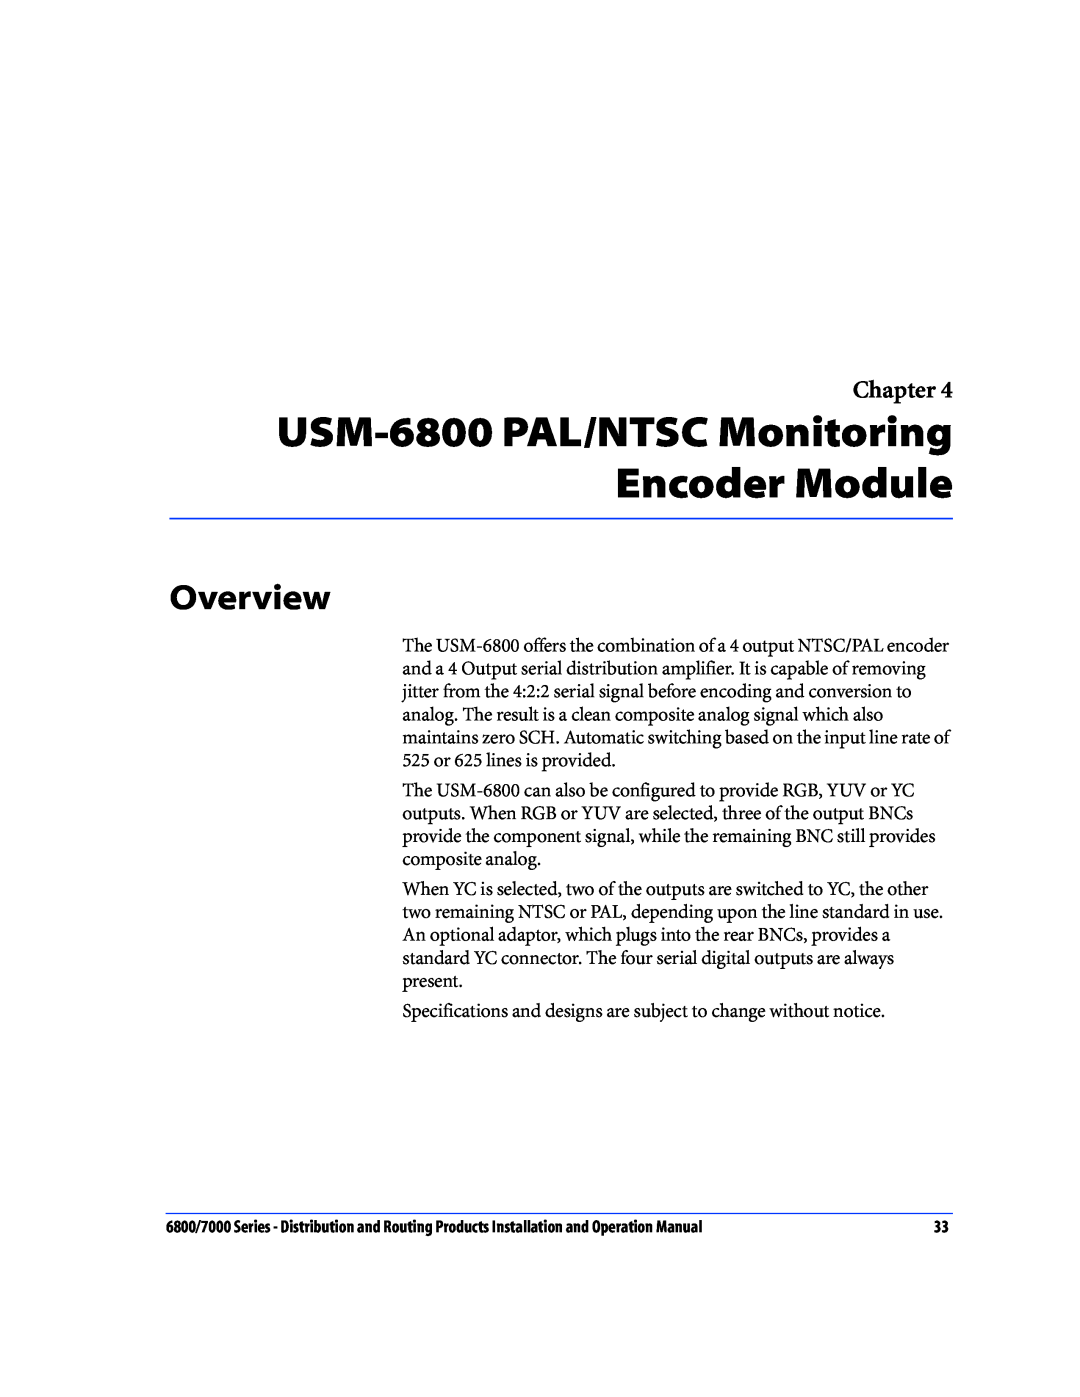 Nokia 6800 Series, 7000 Series operation manual USM-6800 PAL/NTSC Monitoring Encoder Module, Overview, Chapter 